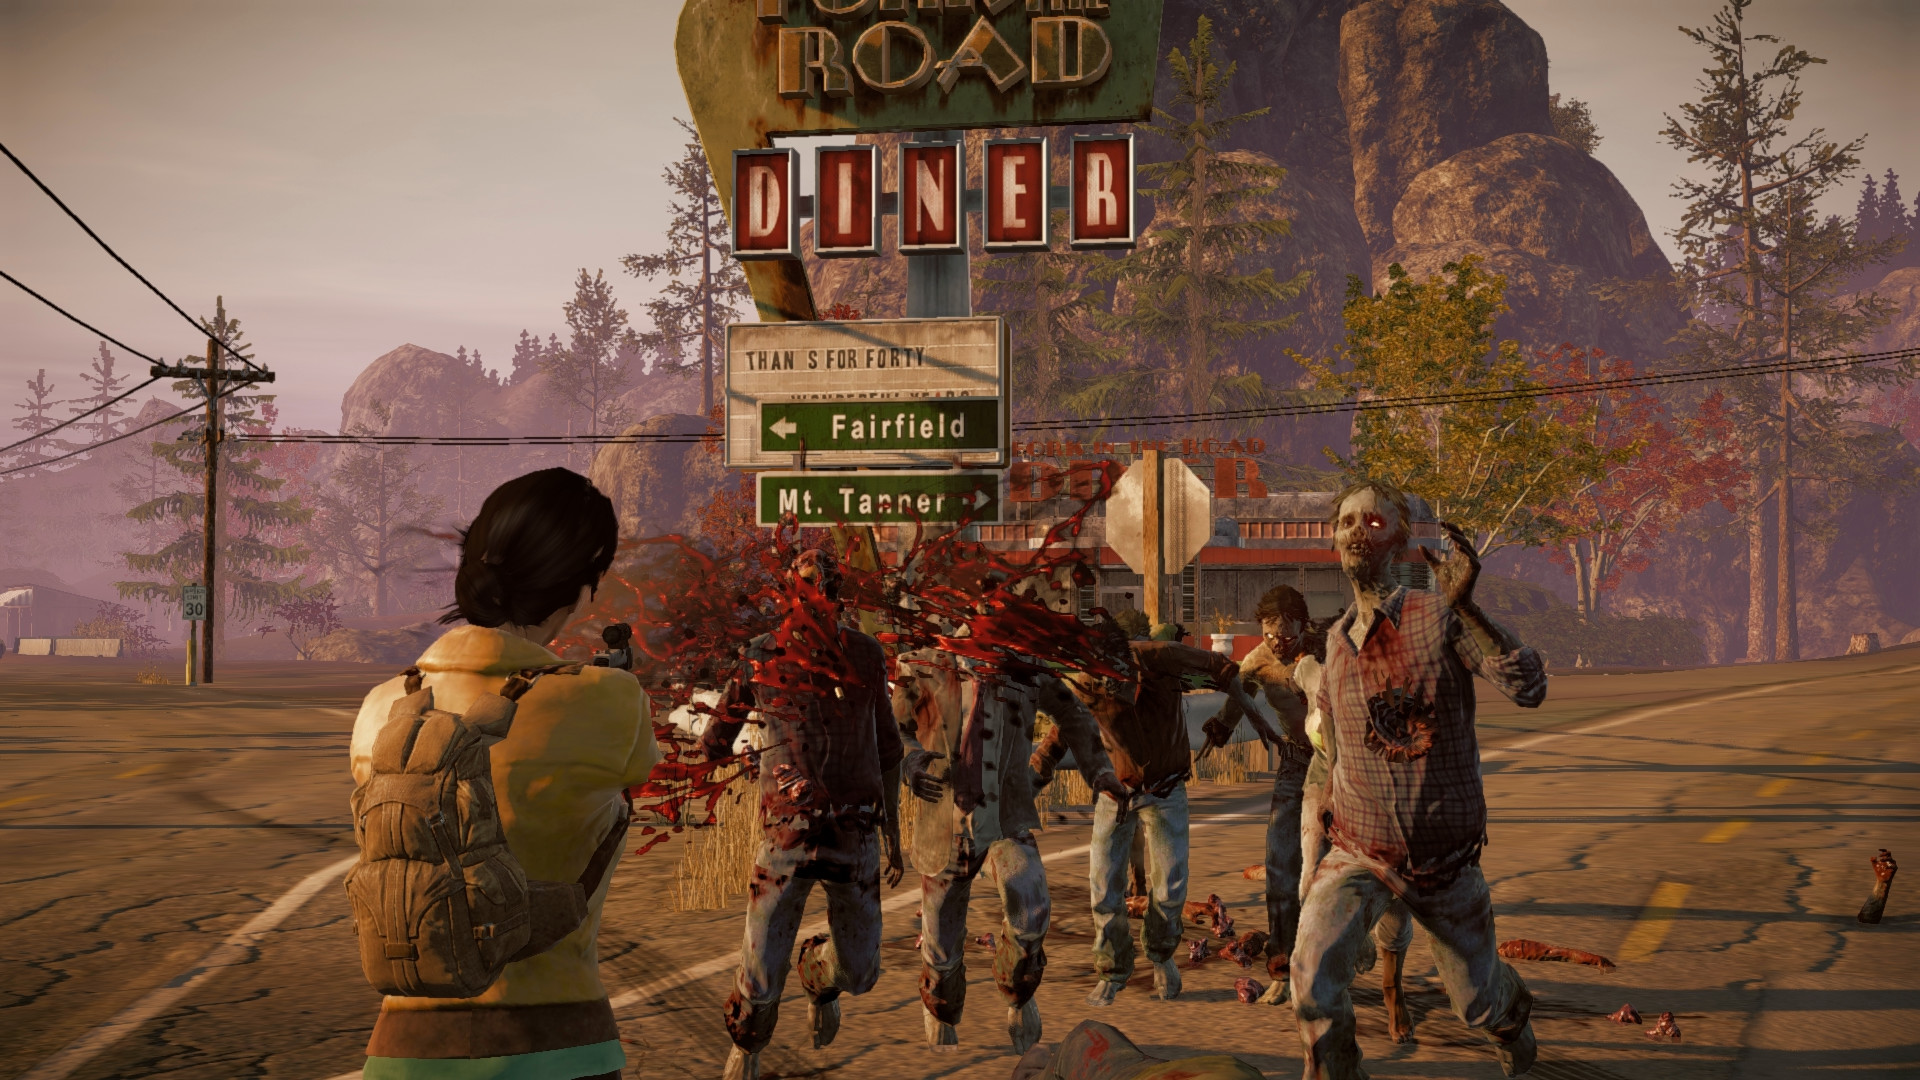 State of Decay: YOSE on Steam